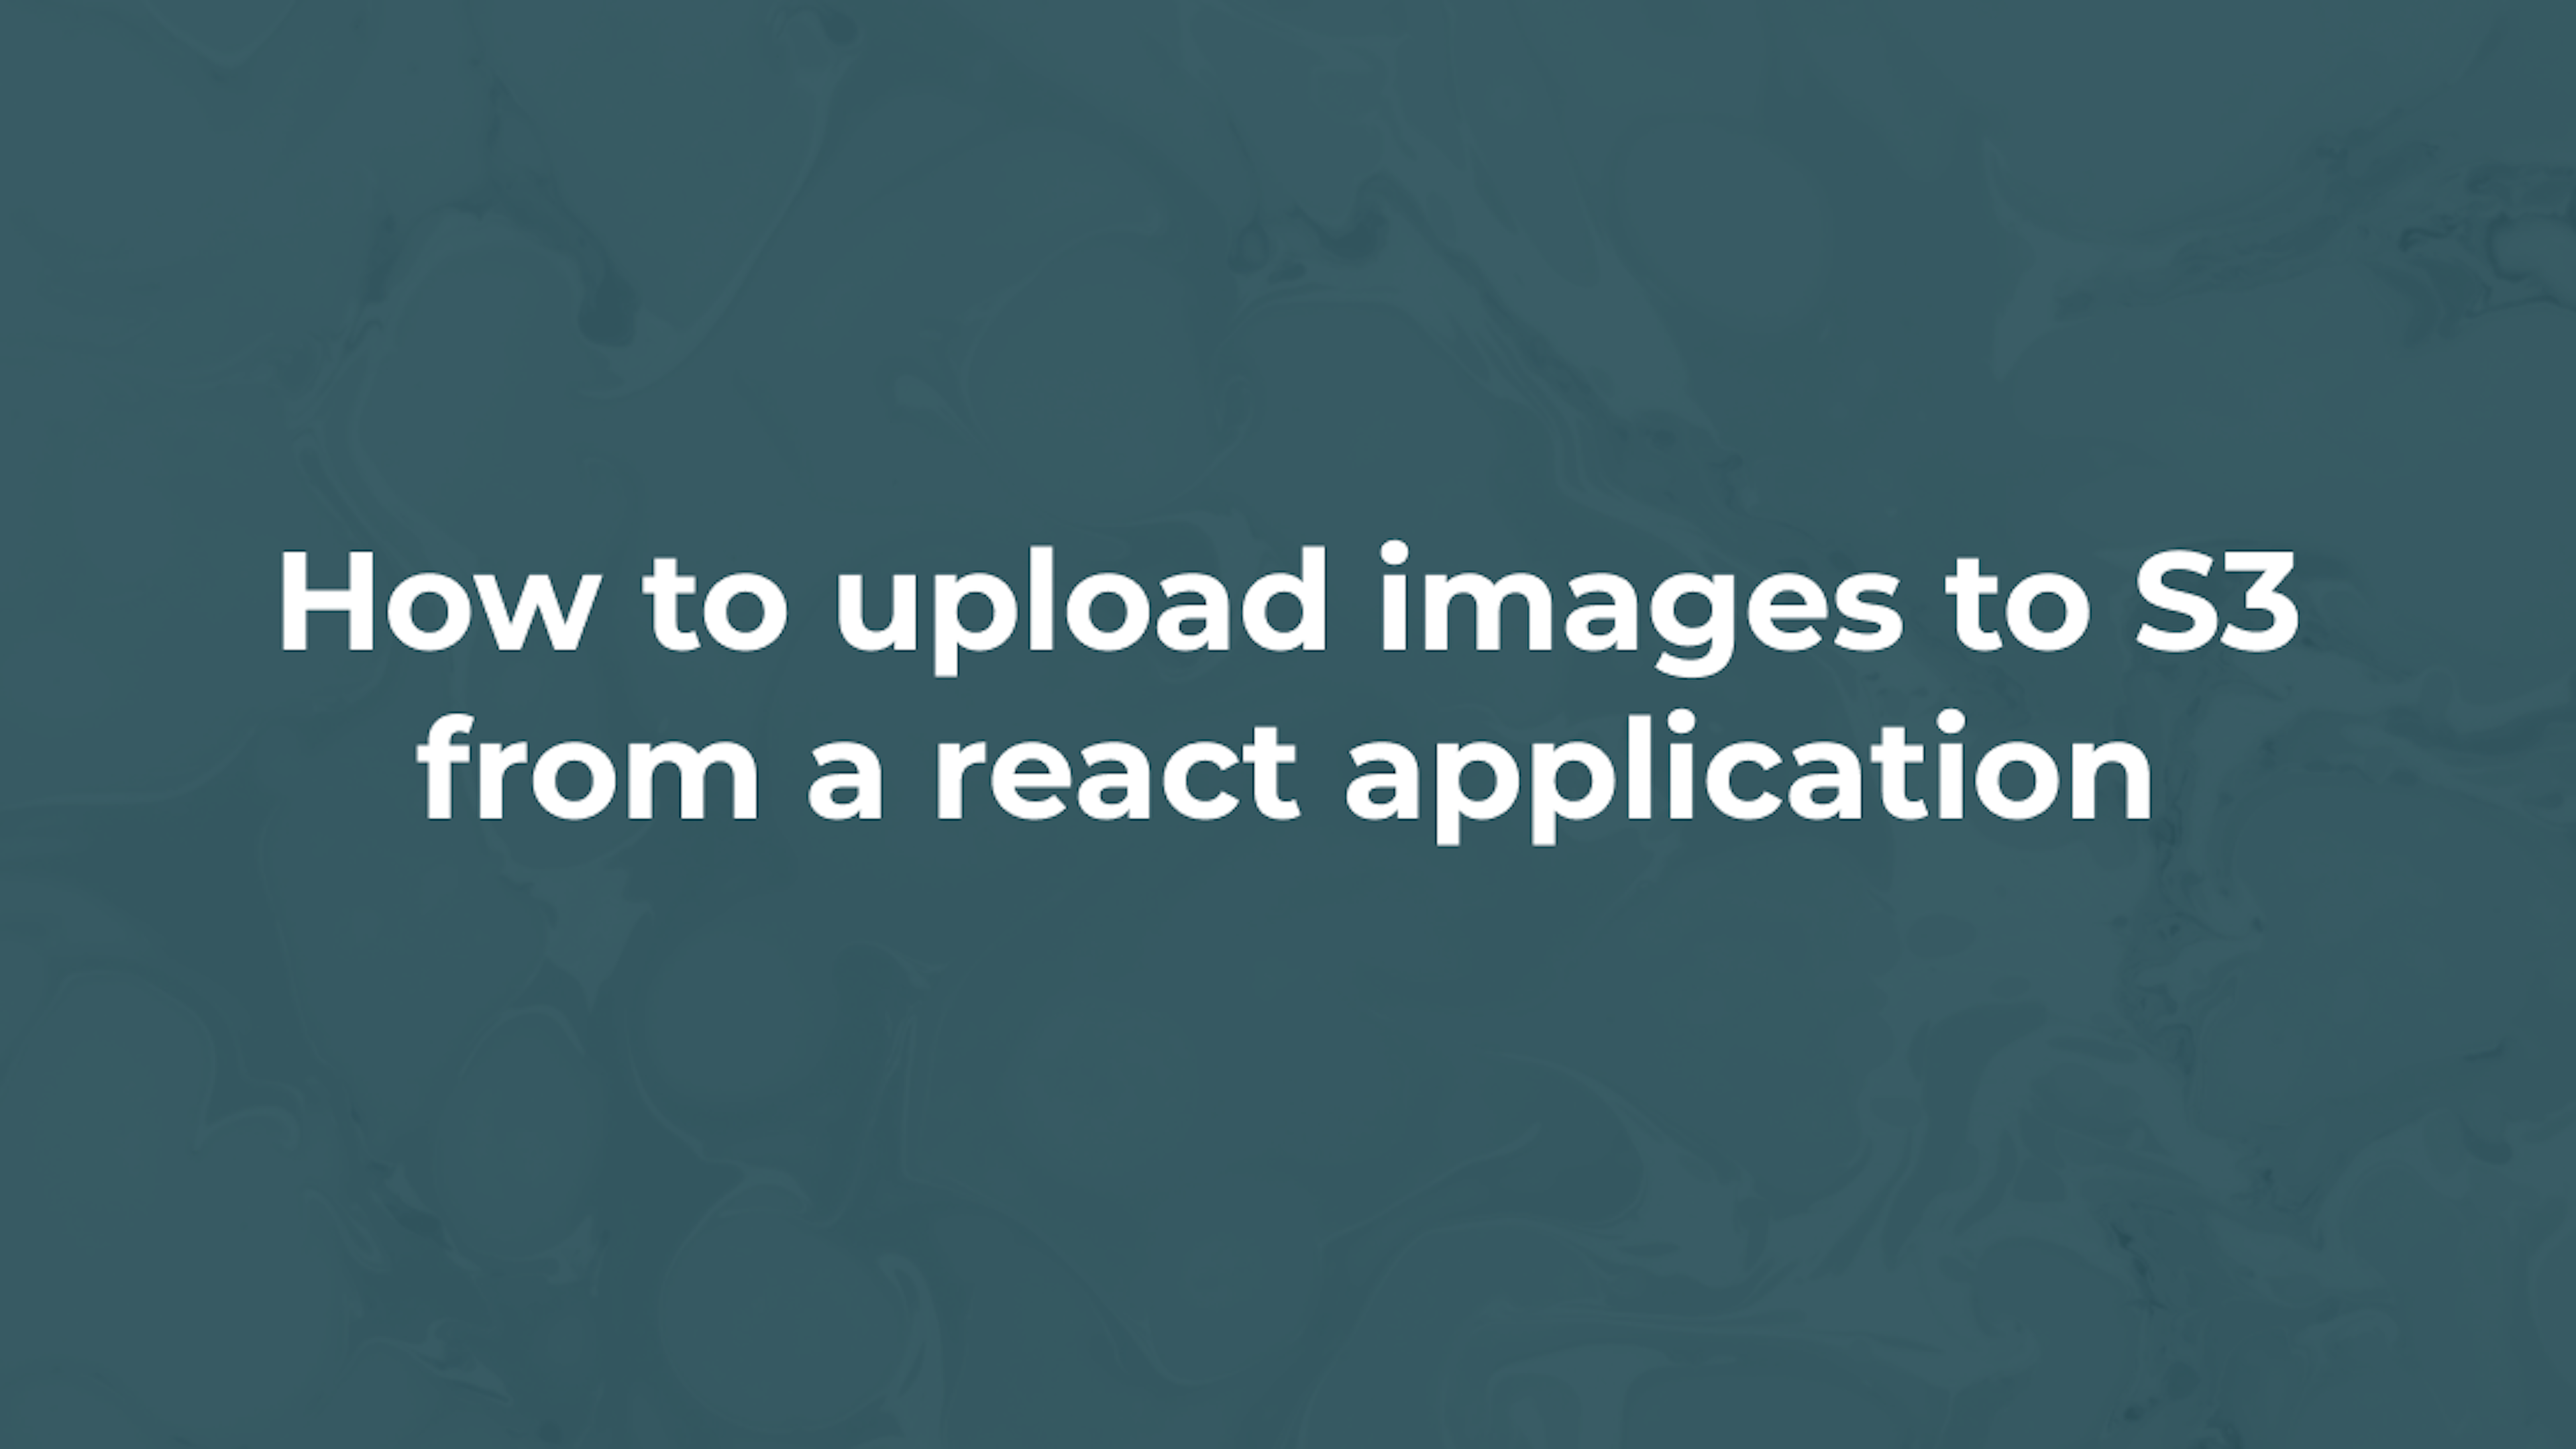 How to upload images to S3 from a react application